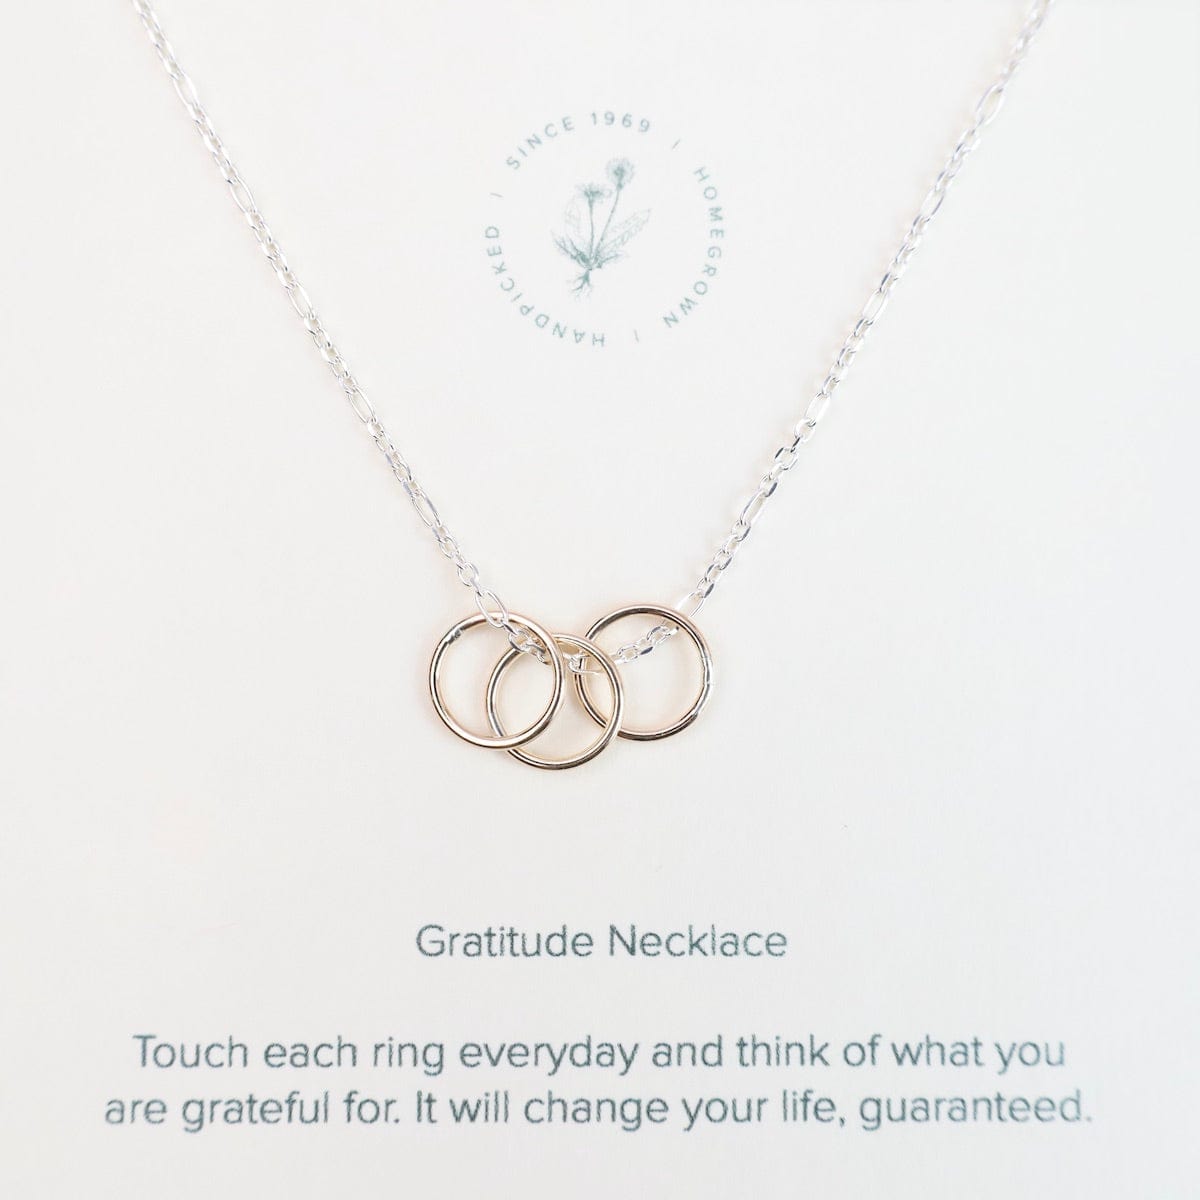 NKL-GF Gratitude Necklace with Gold Filled Rings